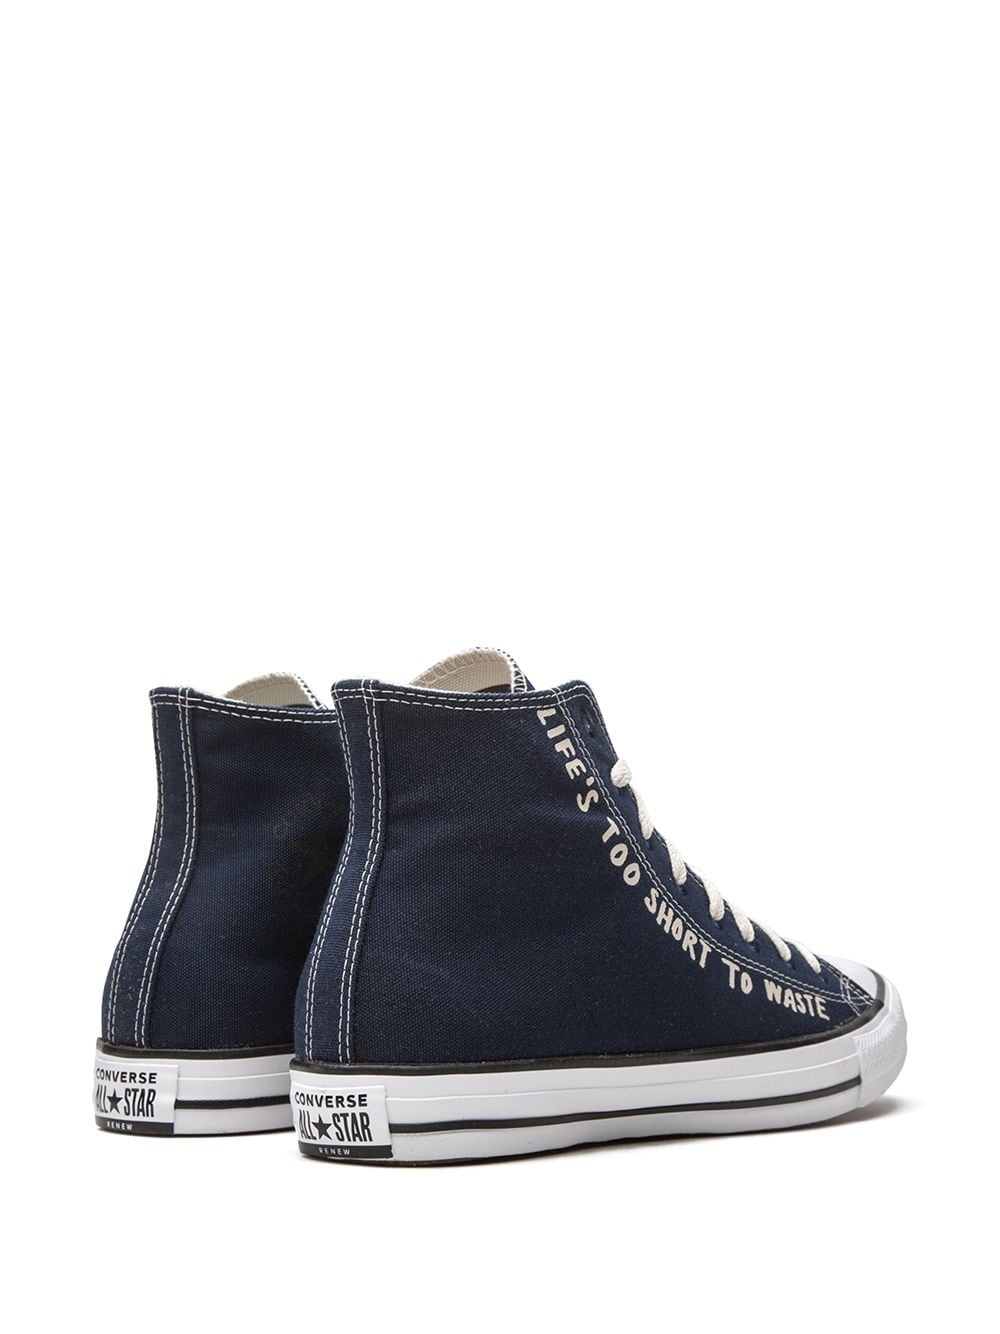 Shop Converse Chuck Taylor All Star Hi "life's Too Short To Waste" Sneakers In Blue